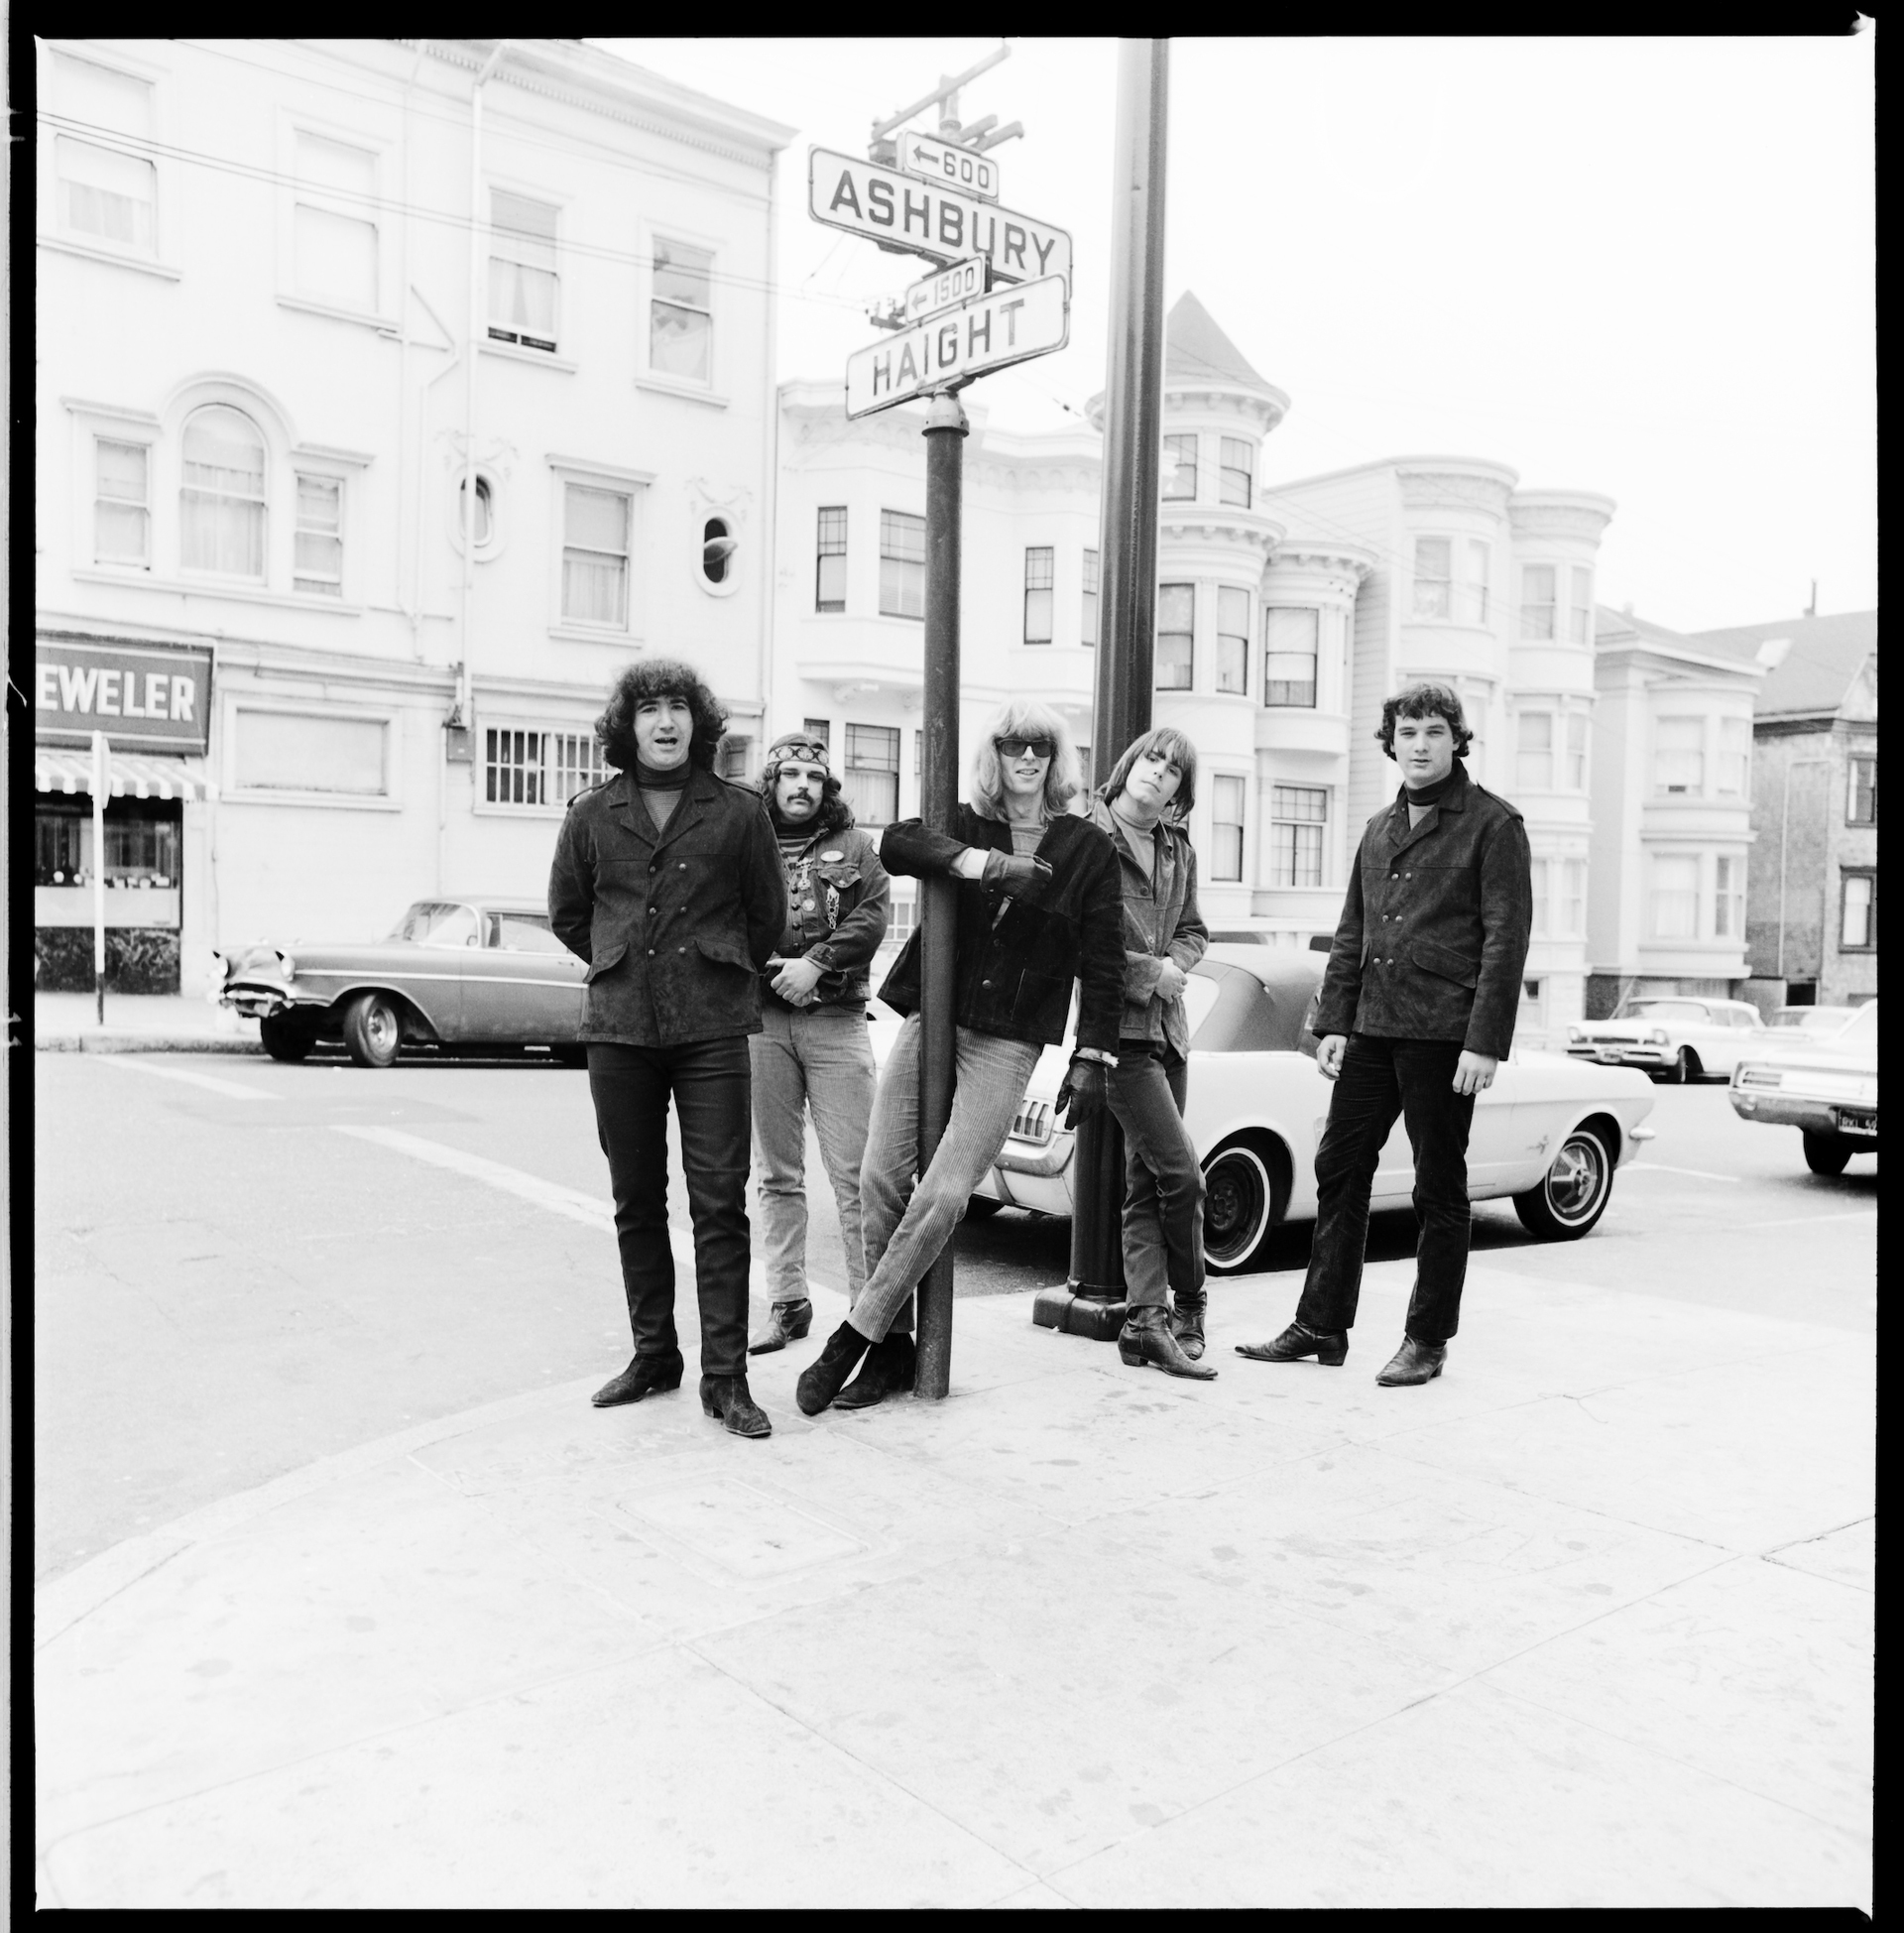 Five young men with long hair gather around and pose next to a street sign at an intersection that reads Haight Ashbury.